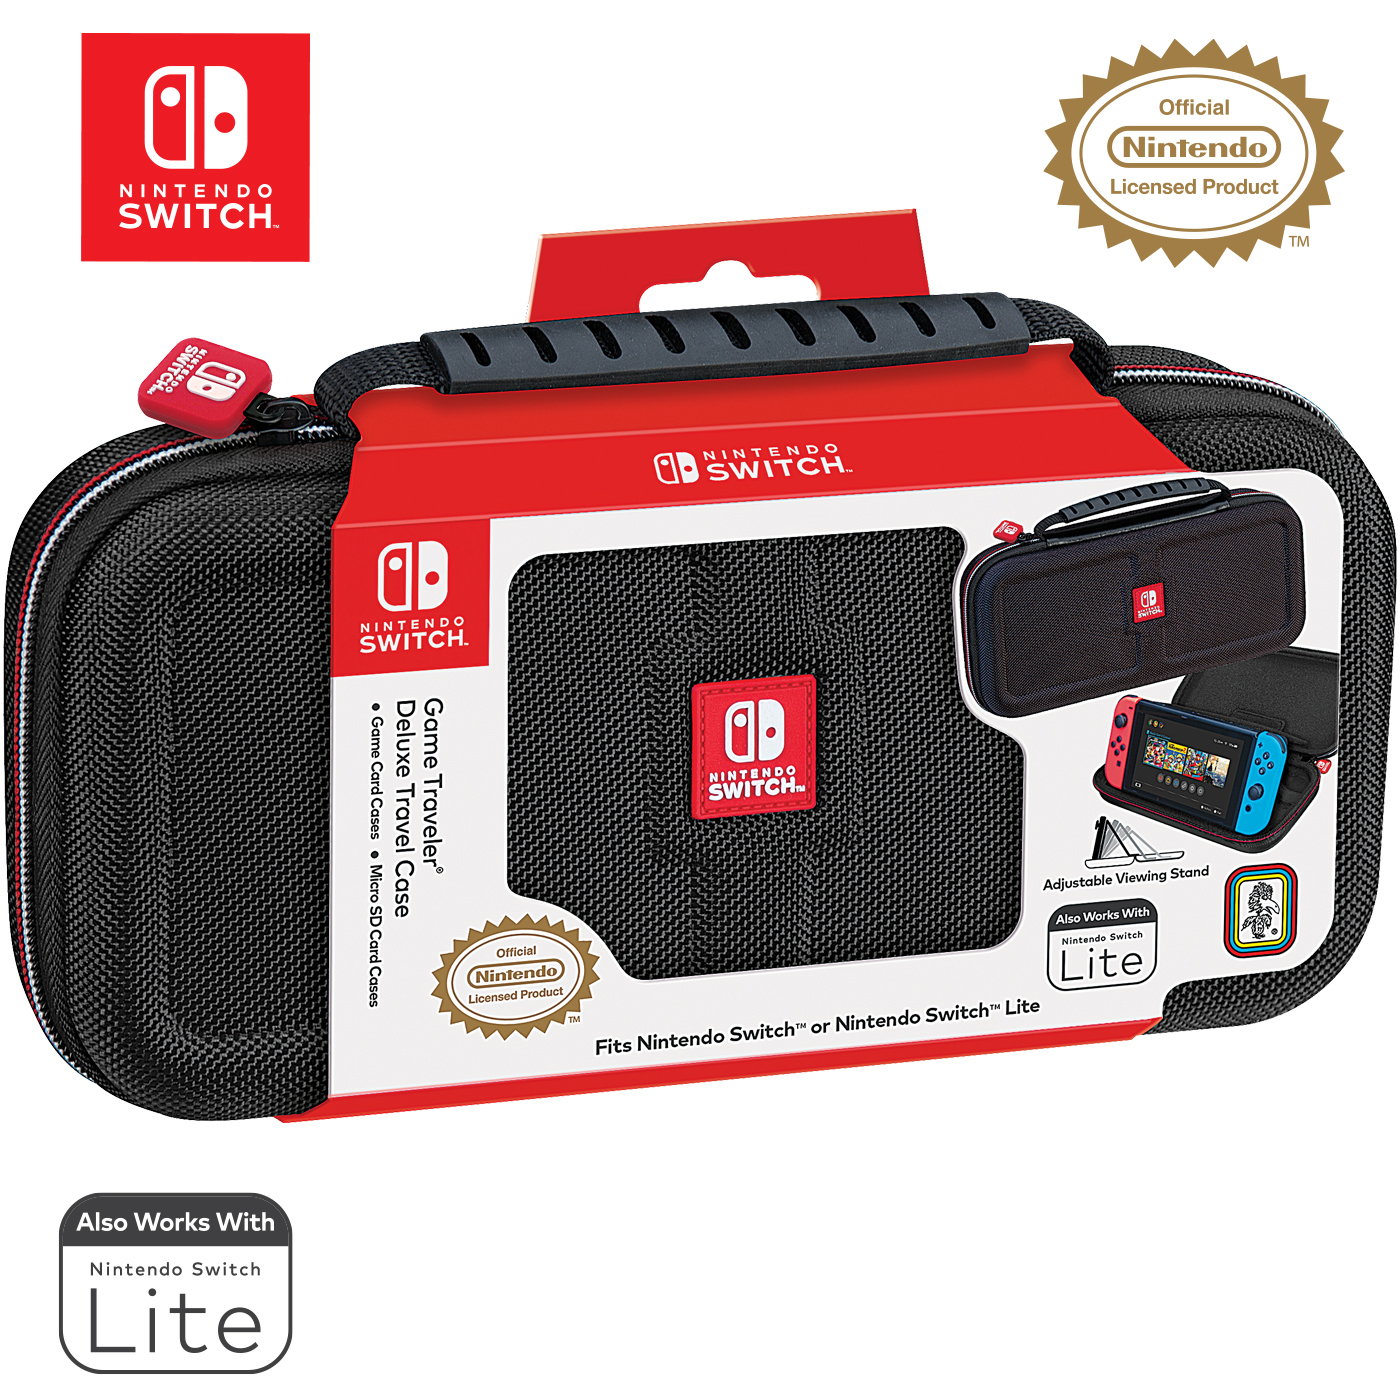 RDS Industries - Nintendo Switch and Nintendo Switch Lite, Black Video Game Traveler Deluxe, Video Game Travel Carrying Case - image 2 of 9